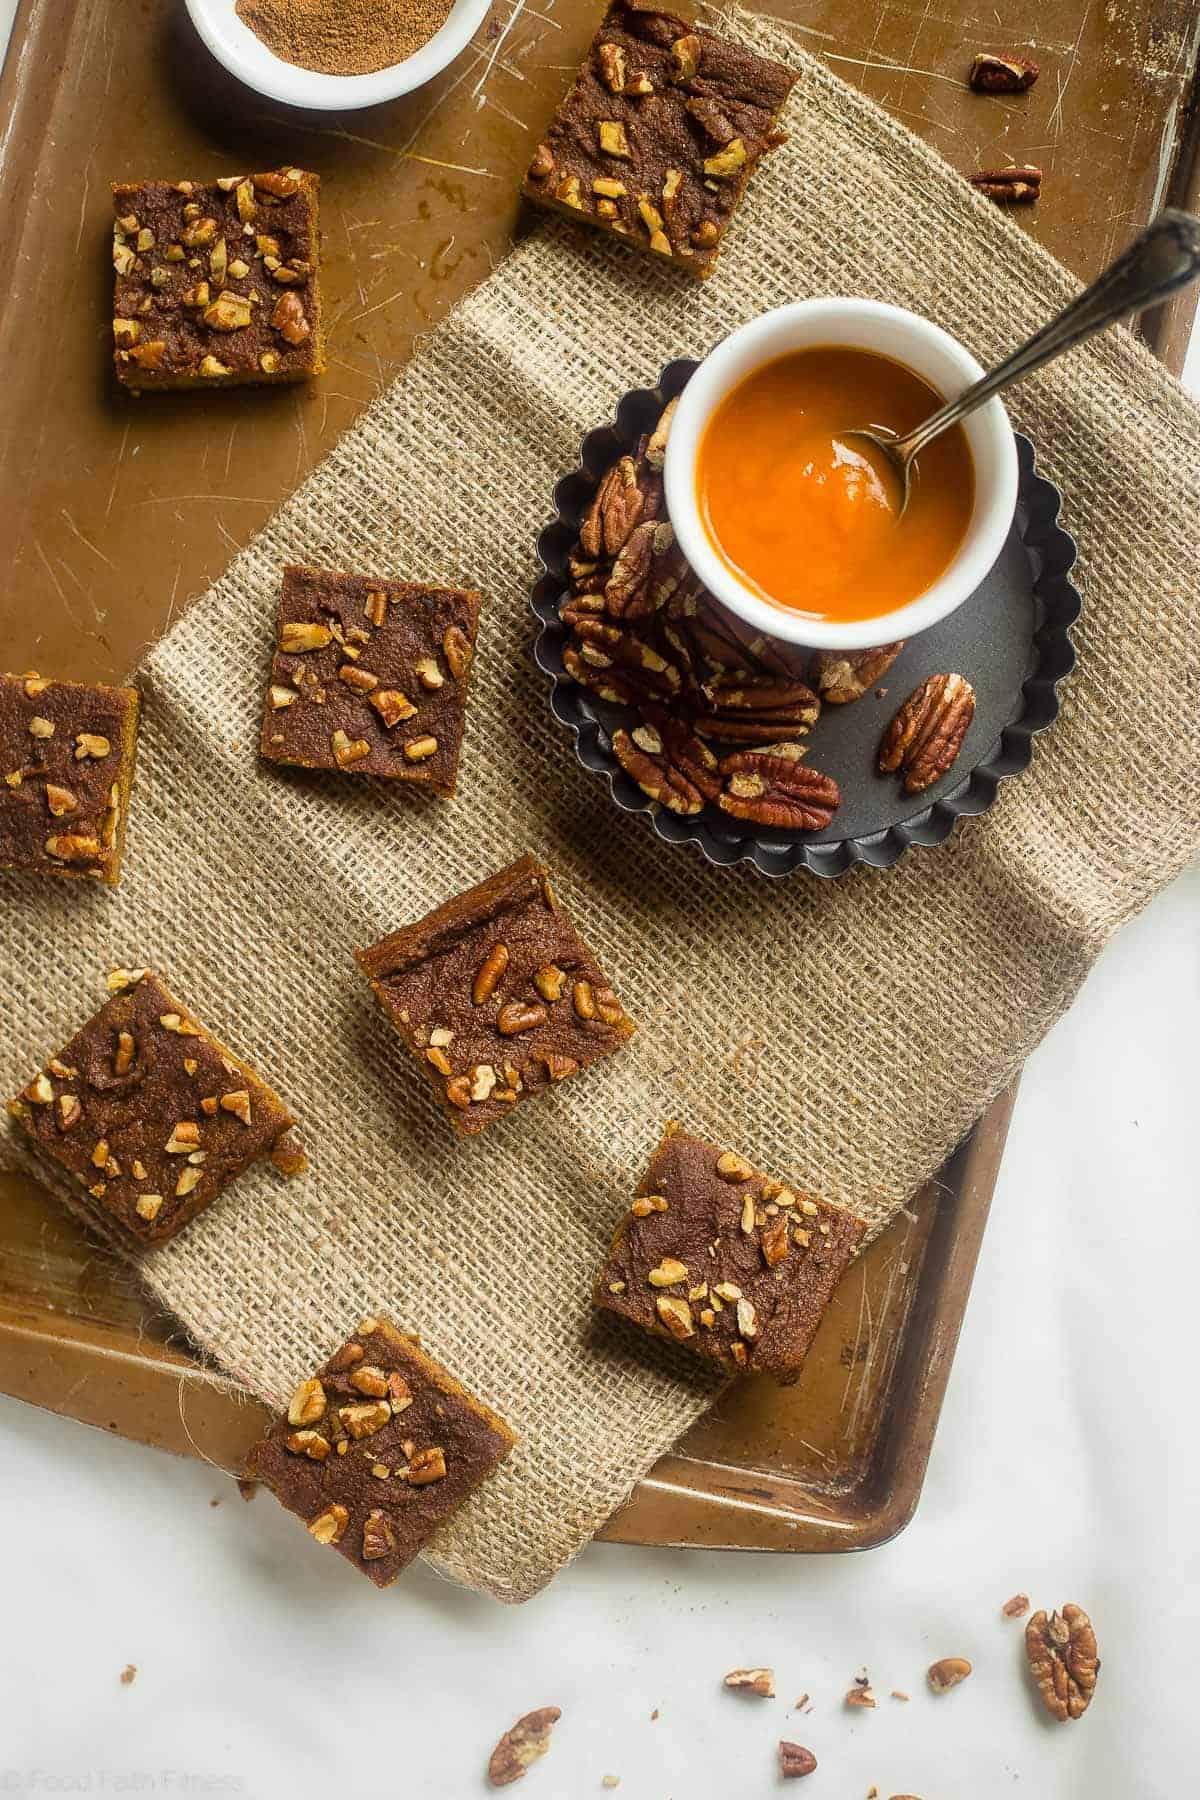 Gluten Free Vegan Carrot Cake Blondies - These carrot cake blondies are dense, chewy and spicy-sweet! You'd never know they're a healthy, paleo-friendly treat for only 100 calories! Perfect for Easter! | Foodfaithfitness.com | @FoodFaithFit